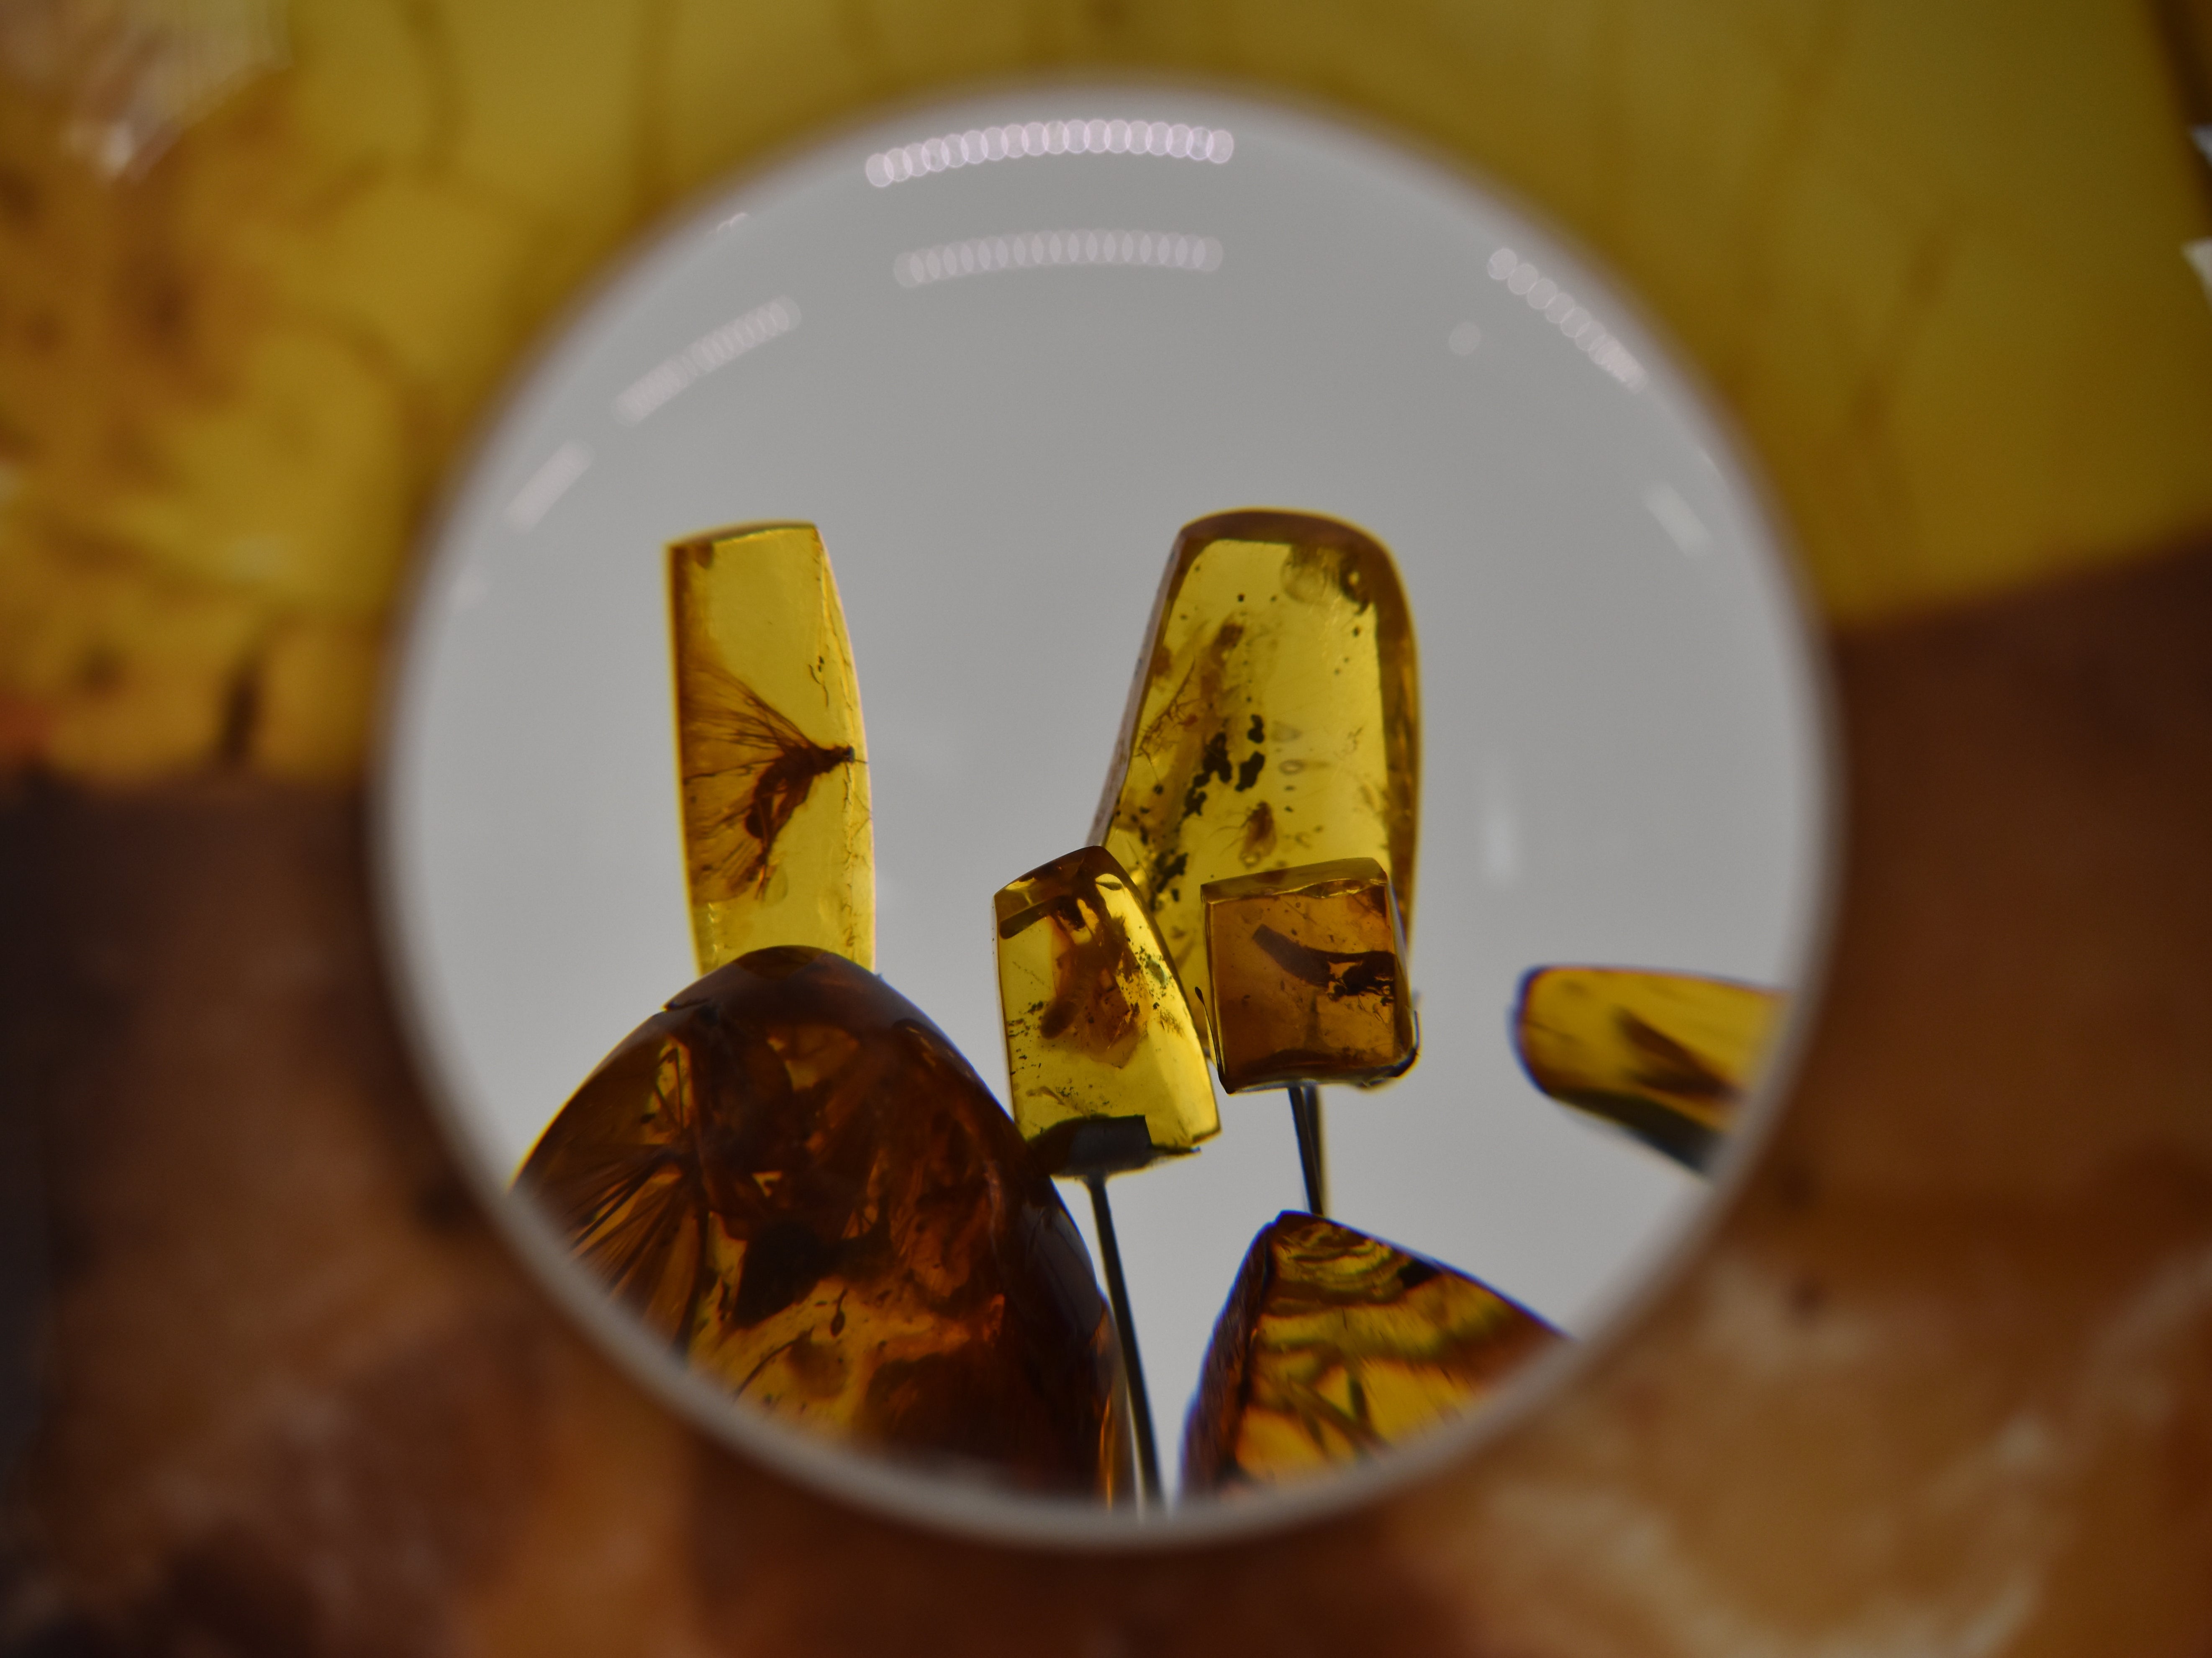 Amber, Lithuania’s most prized asset